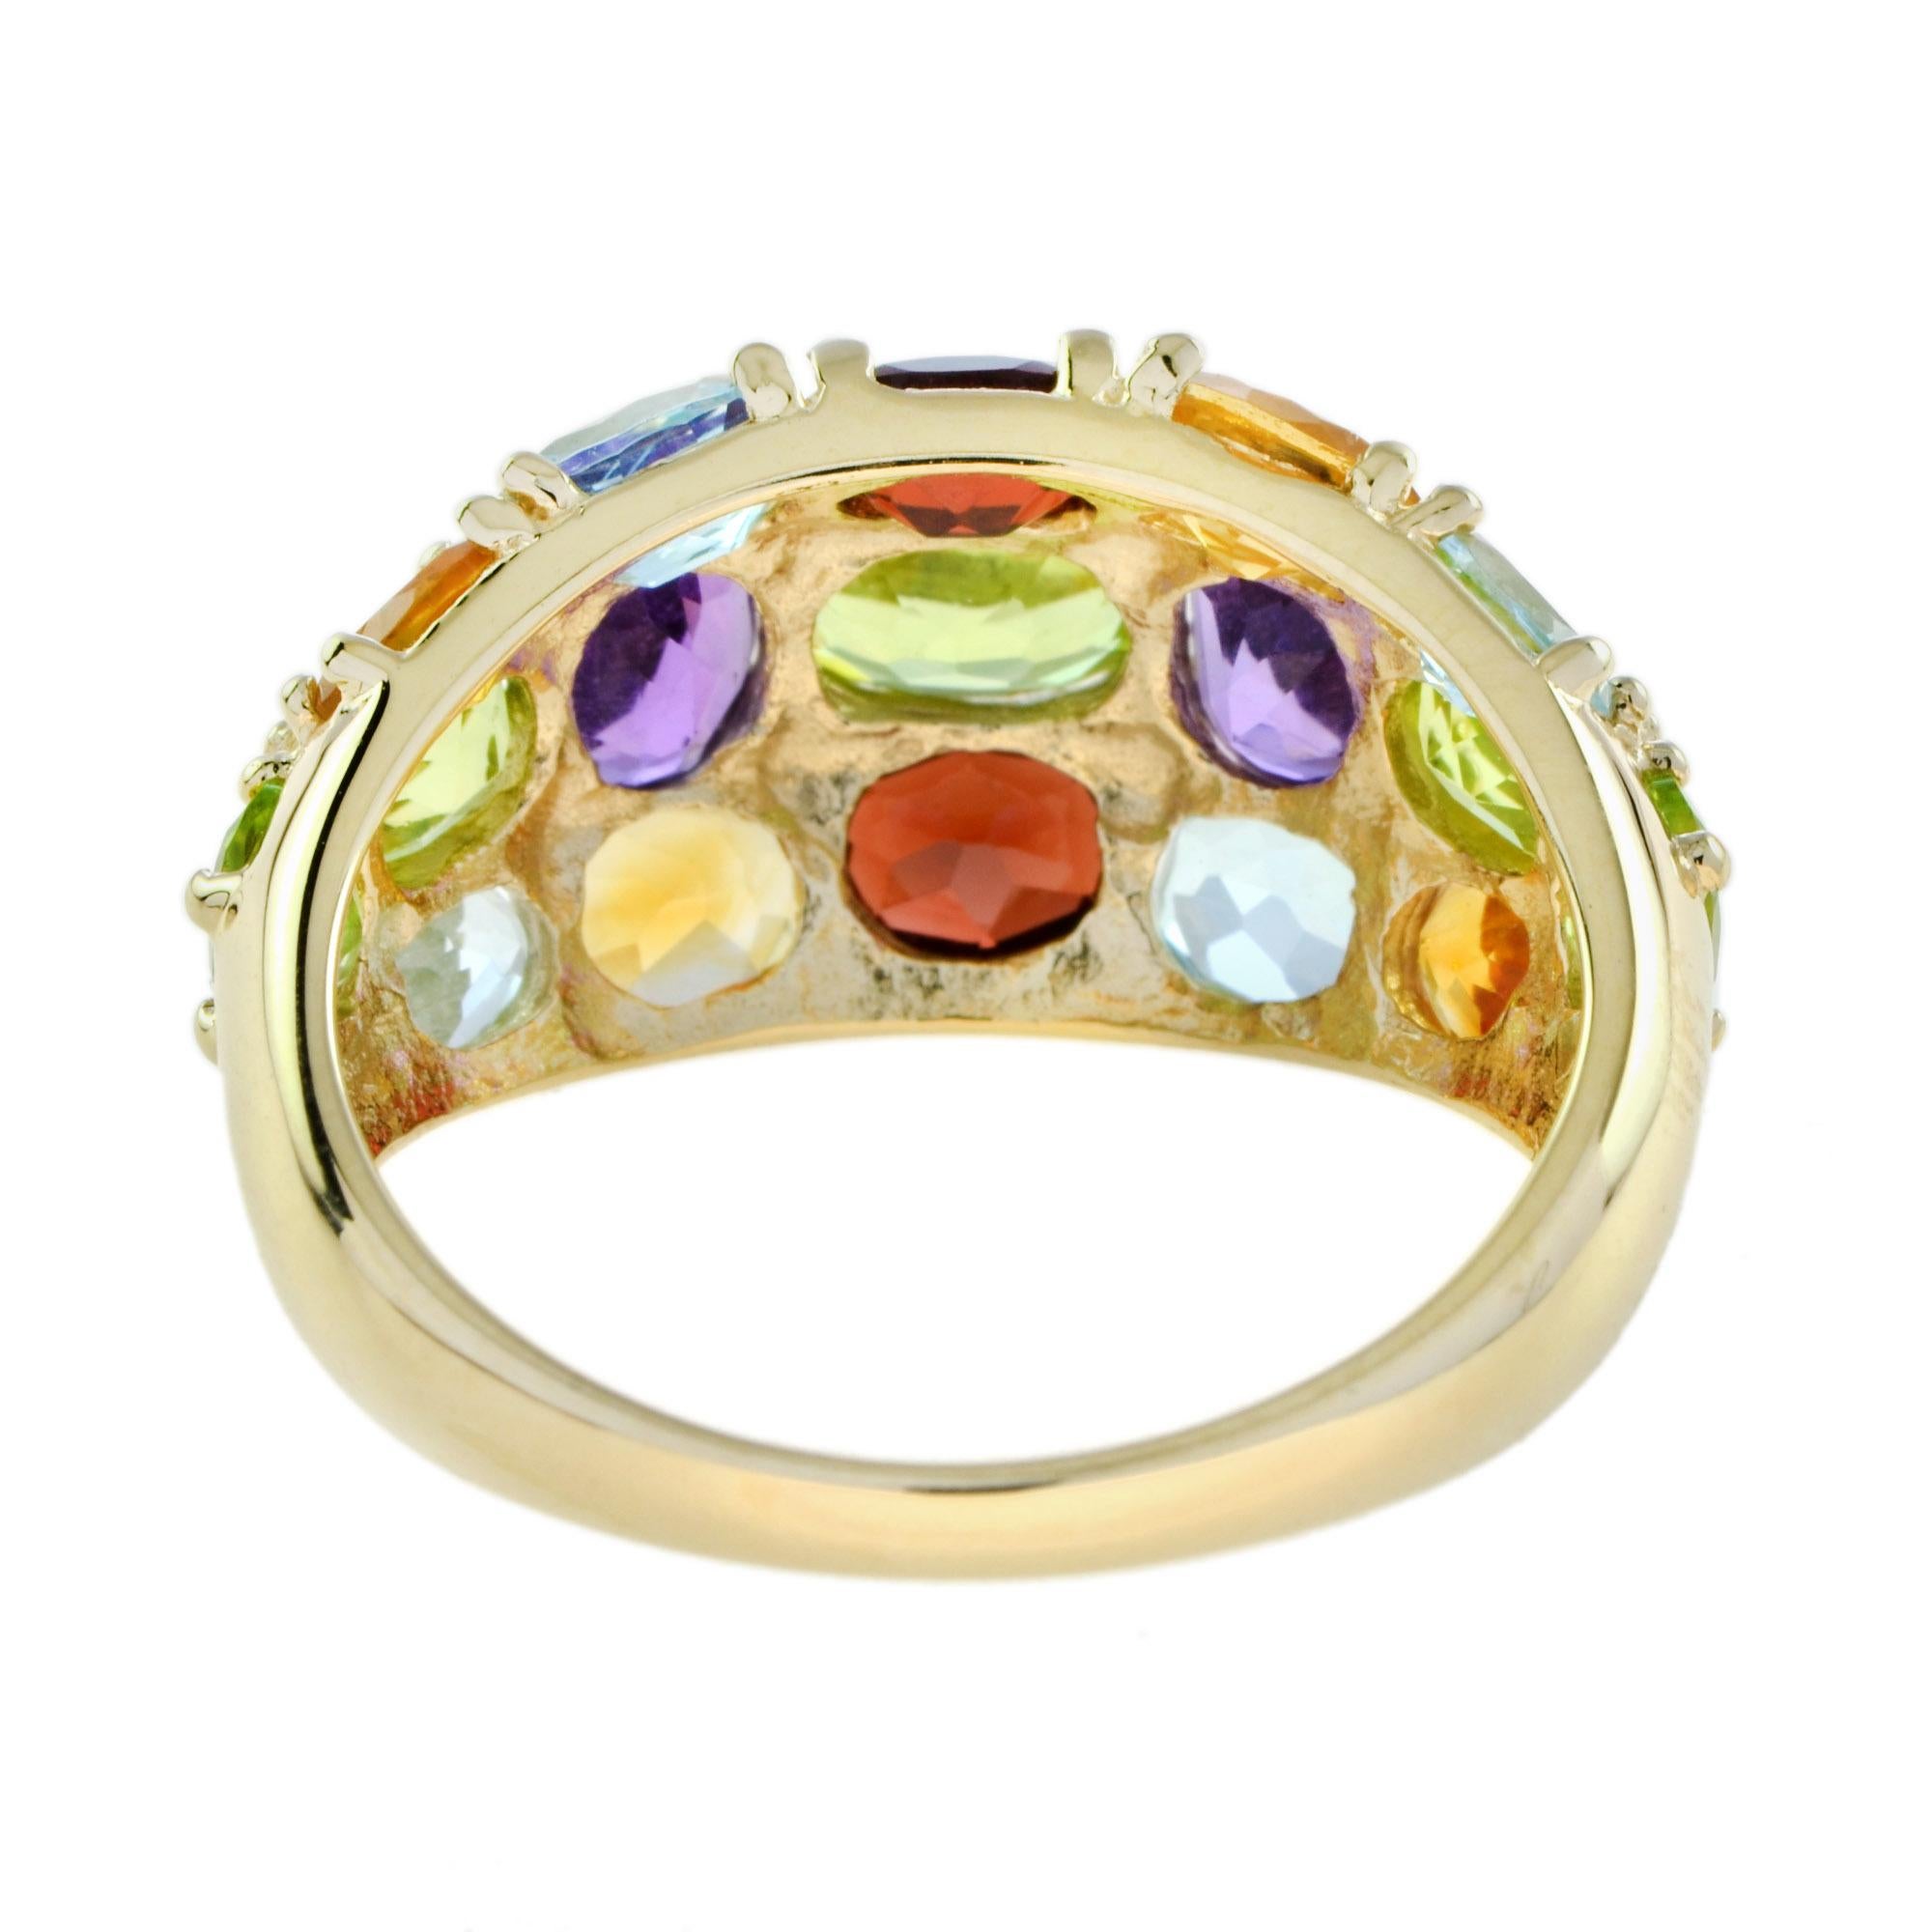 For Sale:  Vintage Style Multi Gemstone Cocktail Ring in 14K Yellow Gold 5